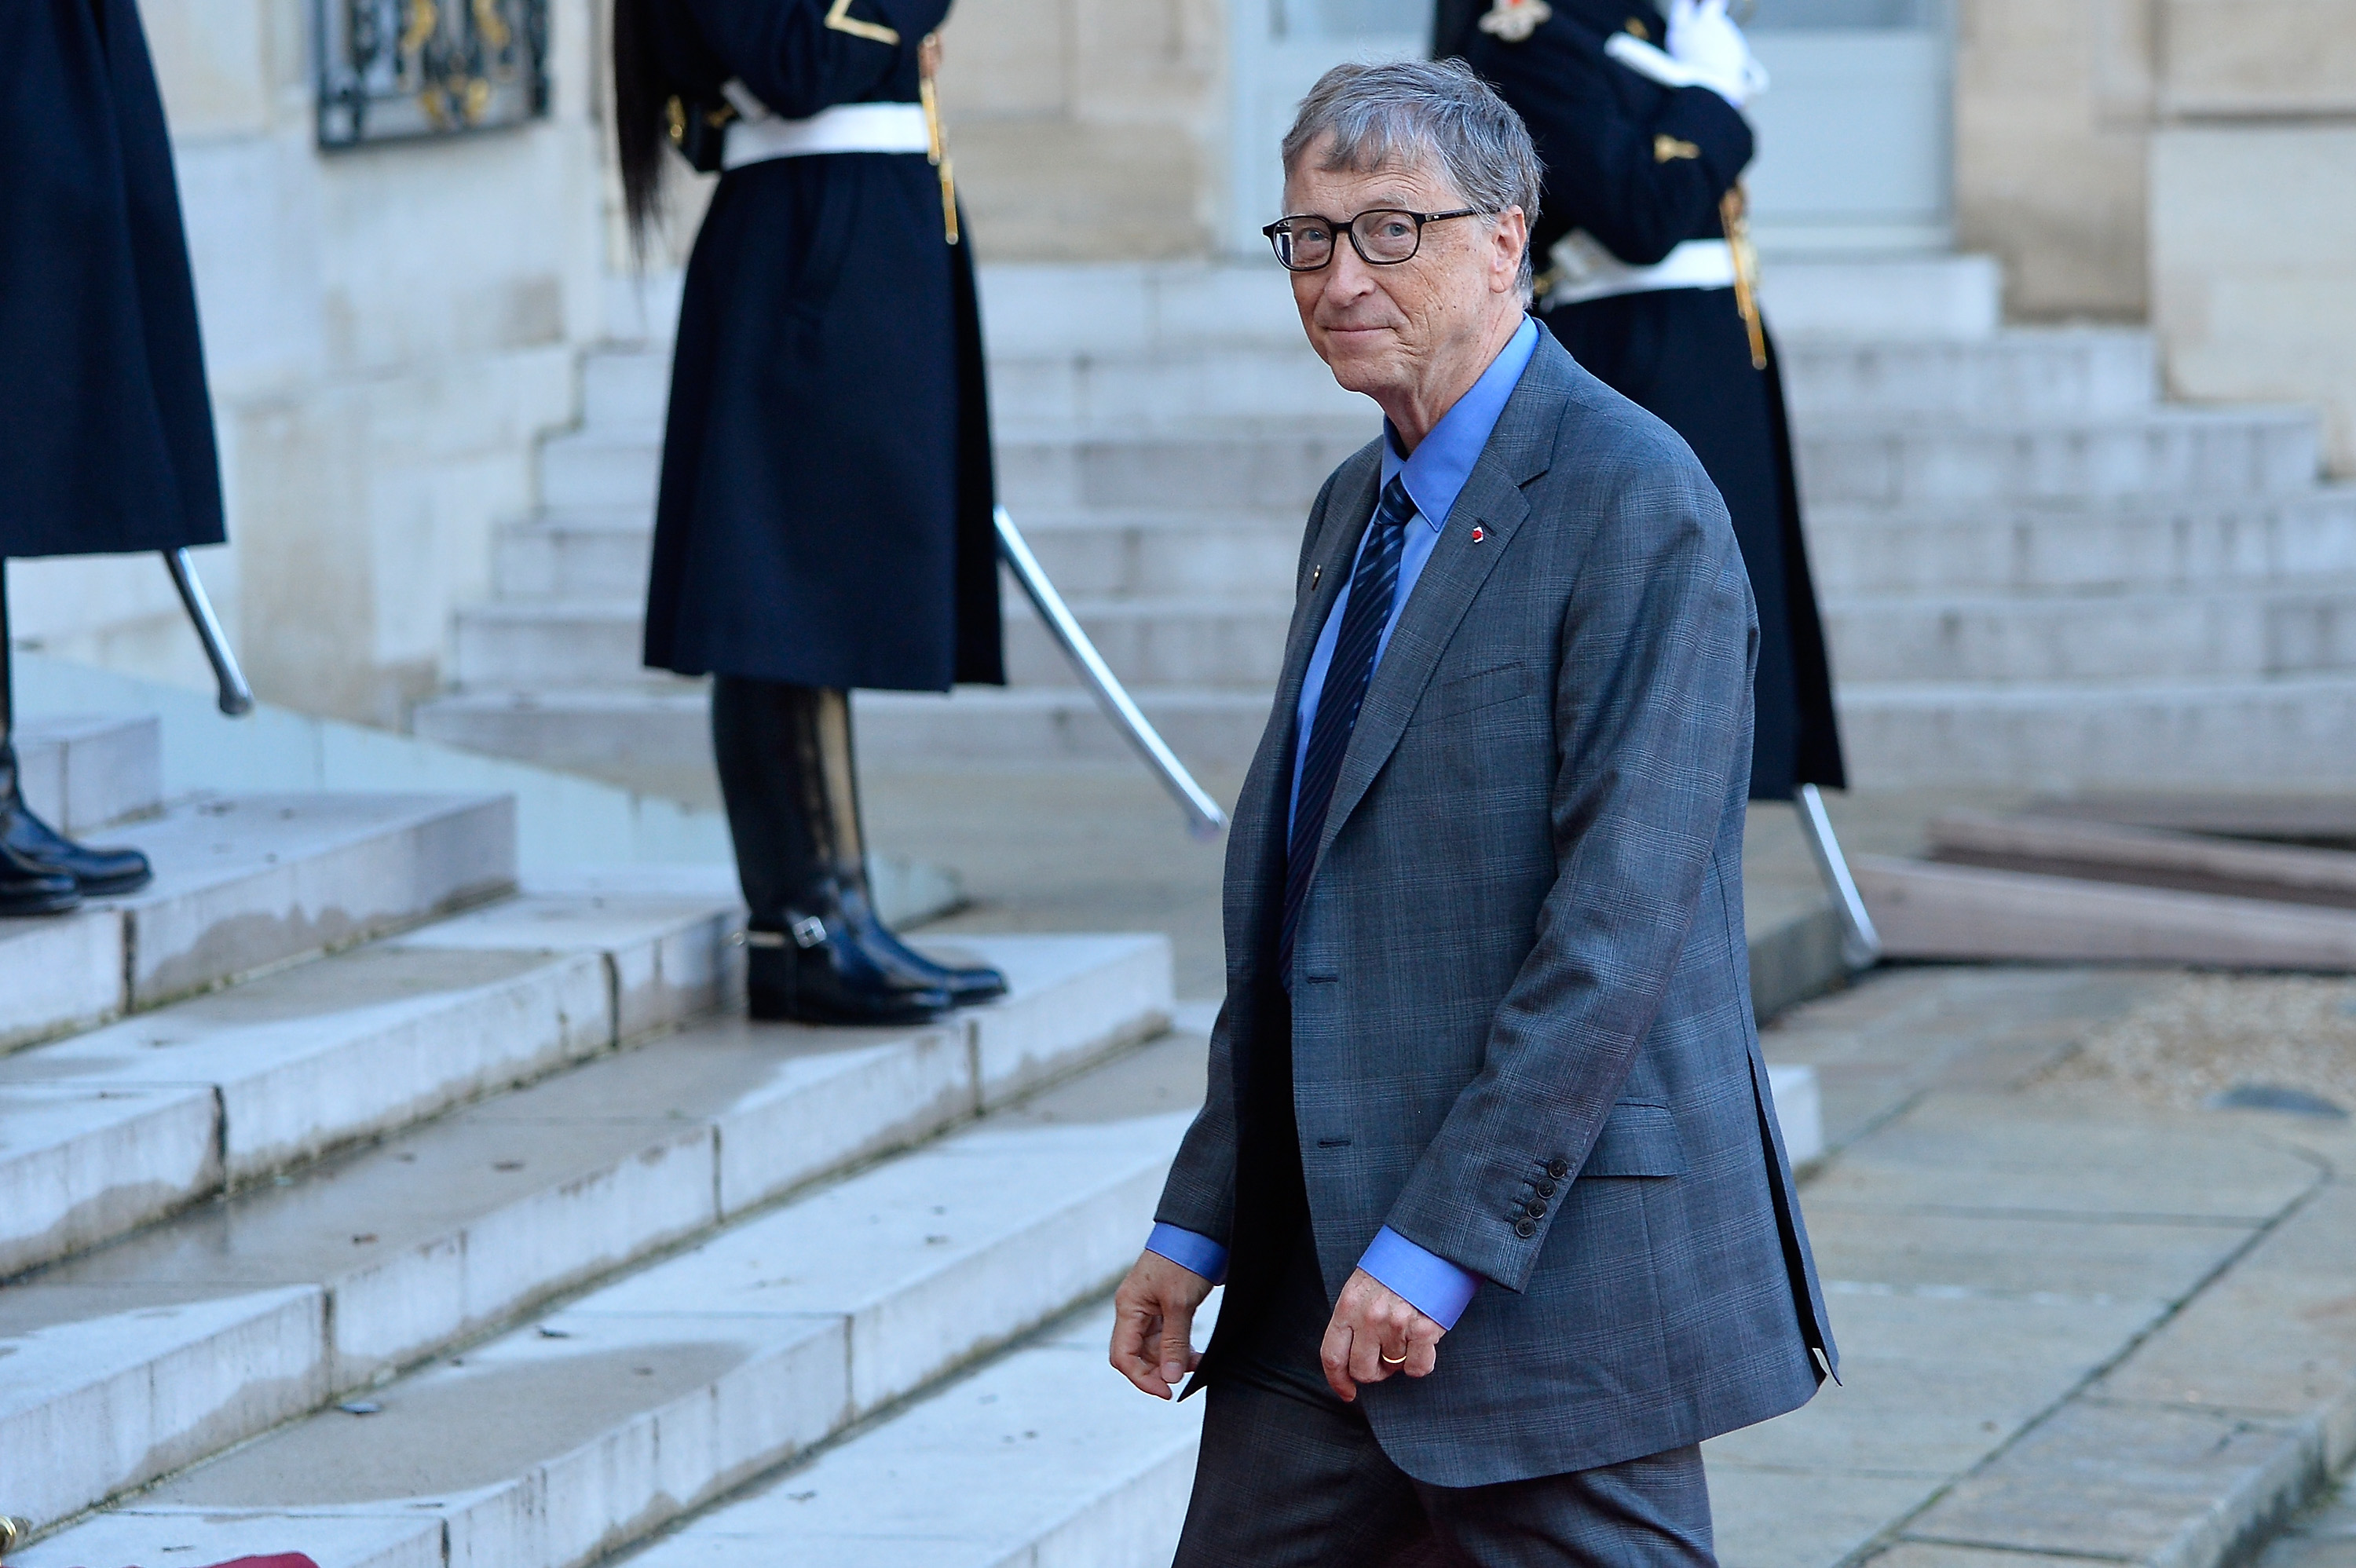 Bill Gates arrives for a meeting with French President Emmanuel Macron as he receives the One Planet Summit's international leaders at Elysee Palace on December 12, 2017 in Paris, France. Macron is hosting the One climate summit, which gathers world leaders, philantropists and other committed private individuals to discuss climate change. (Aurelien Meunier—Getty Images)